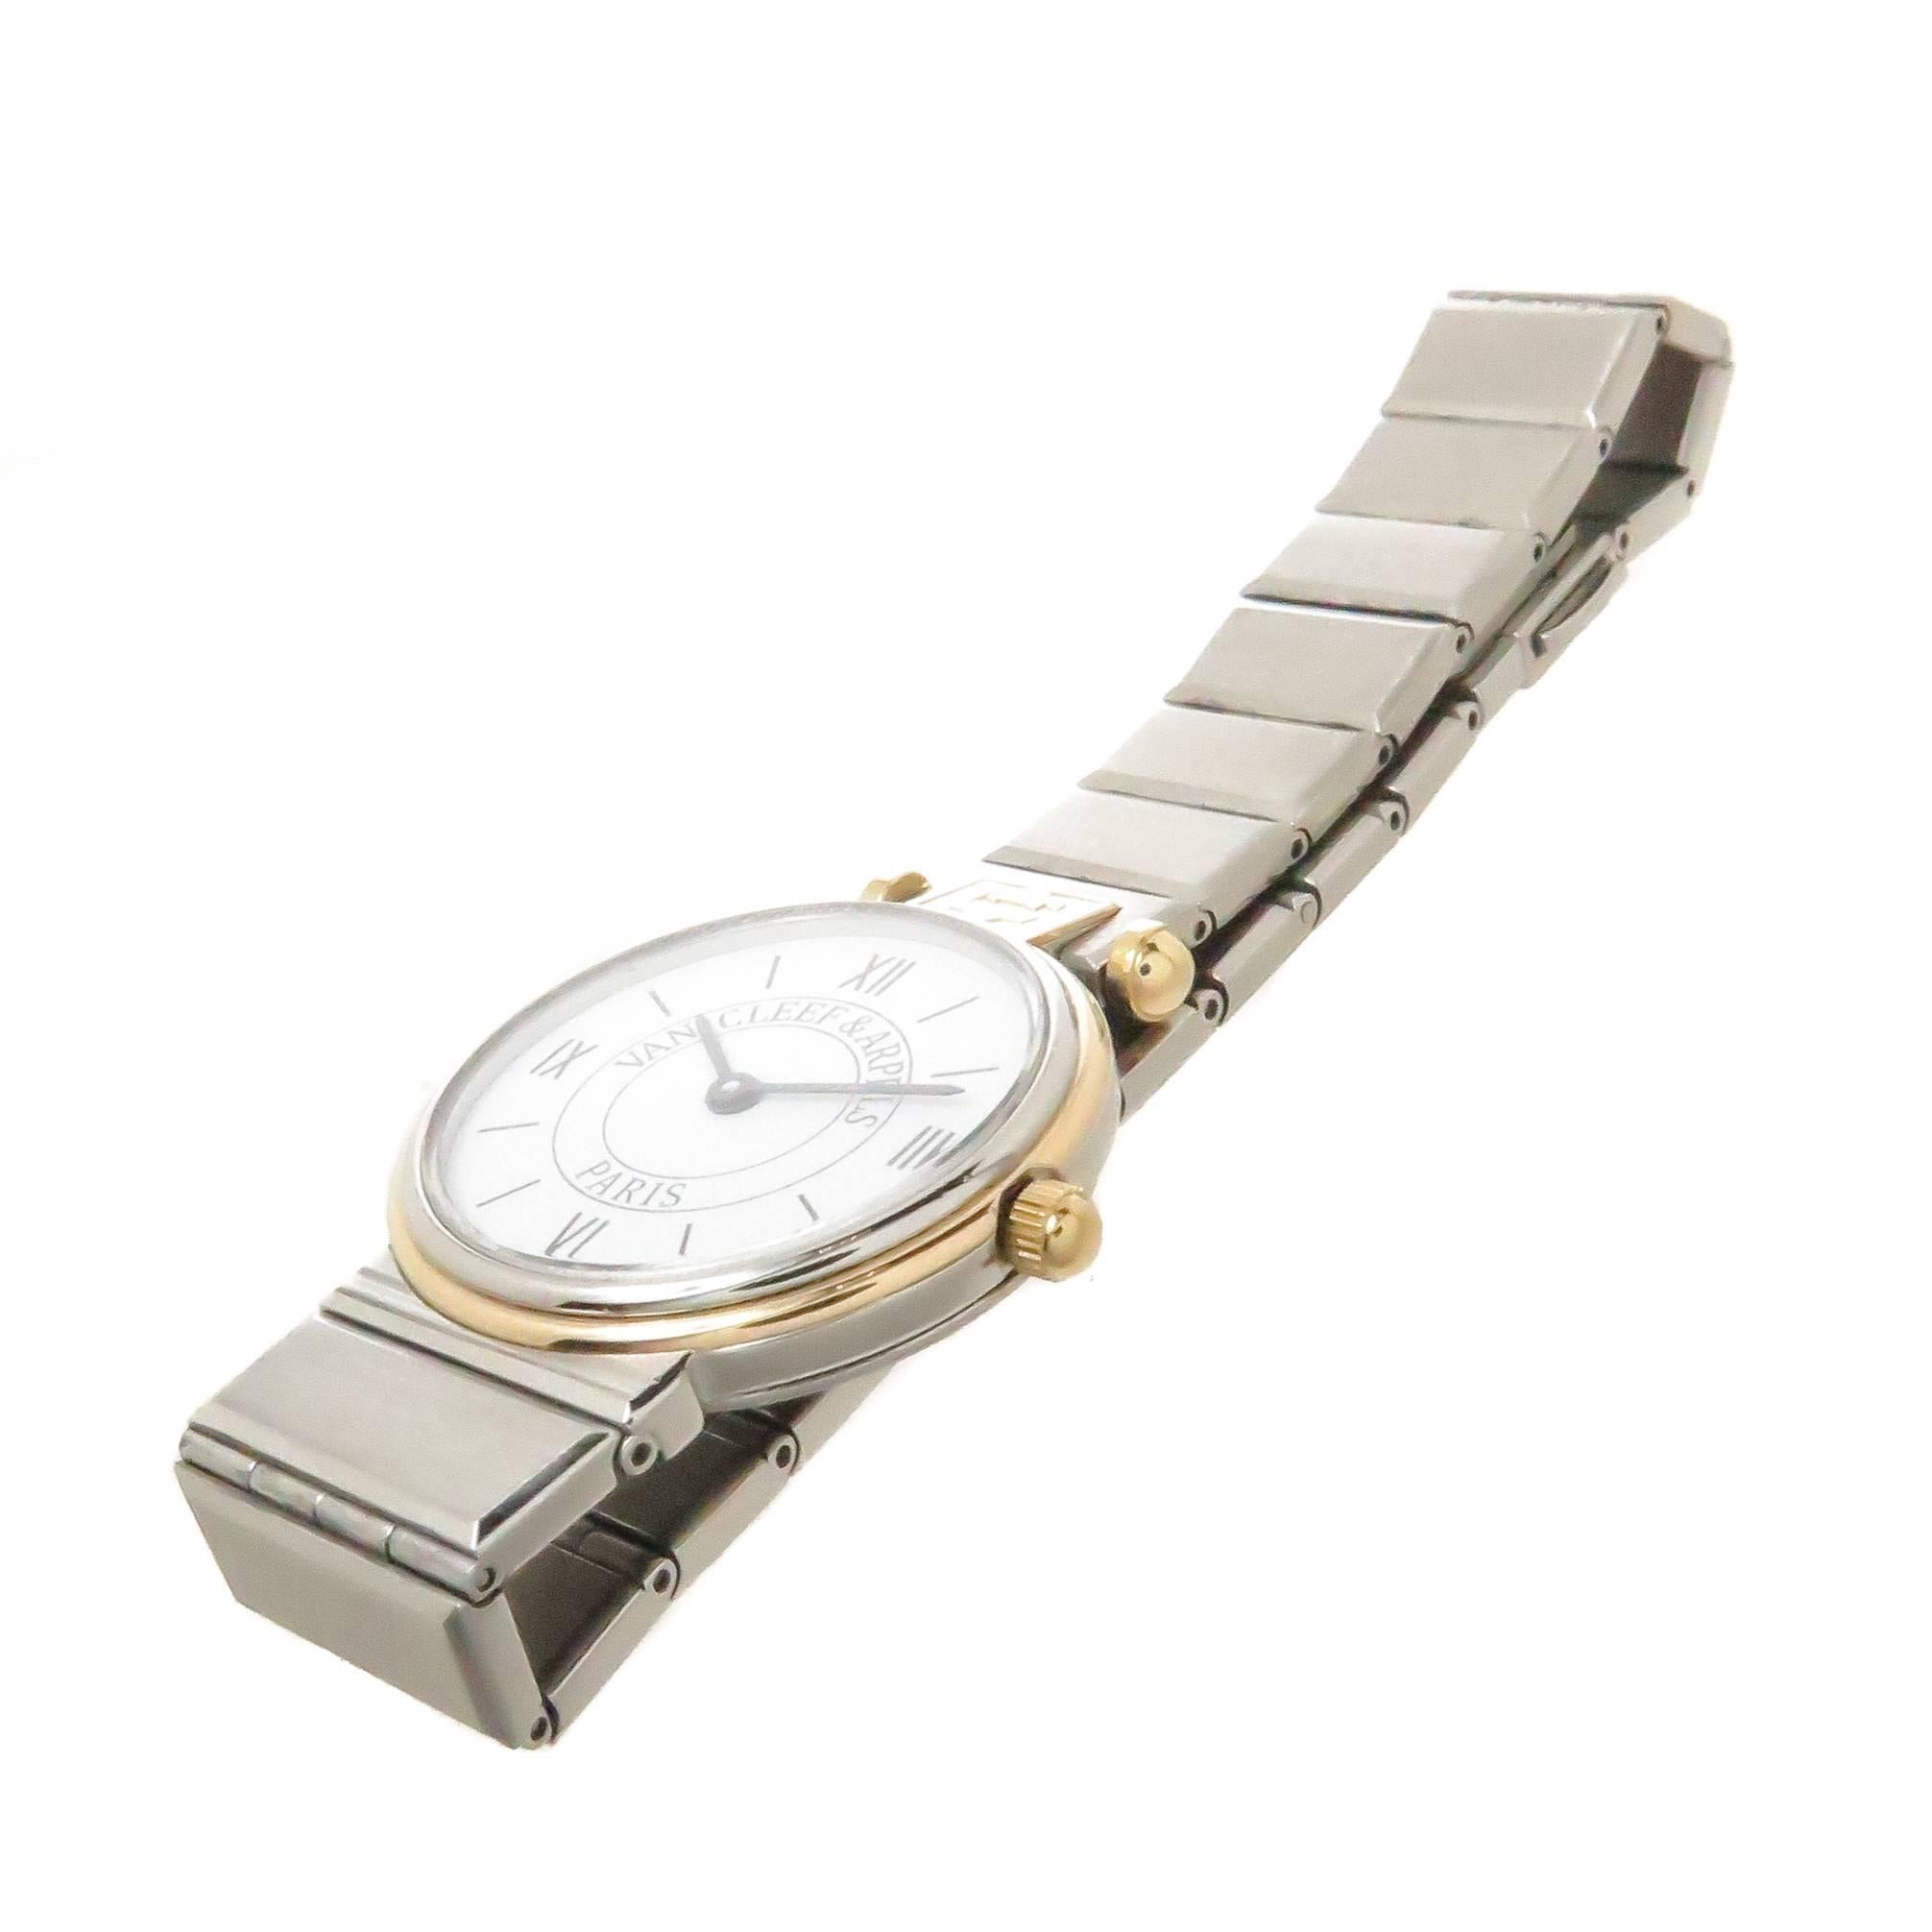 Circa 1990s Van Cleef & Arpels Ladies La Collection Wrist Watch. 24 MM Stainless Steel case with Yellow Gold Bezel, Quartz Movement, white Dial with Black Markers. 1/2 inch wide Stainless Steel Bracelet. Total watch length 6 3/8 inches. Comes in a